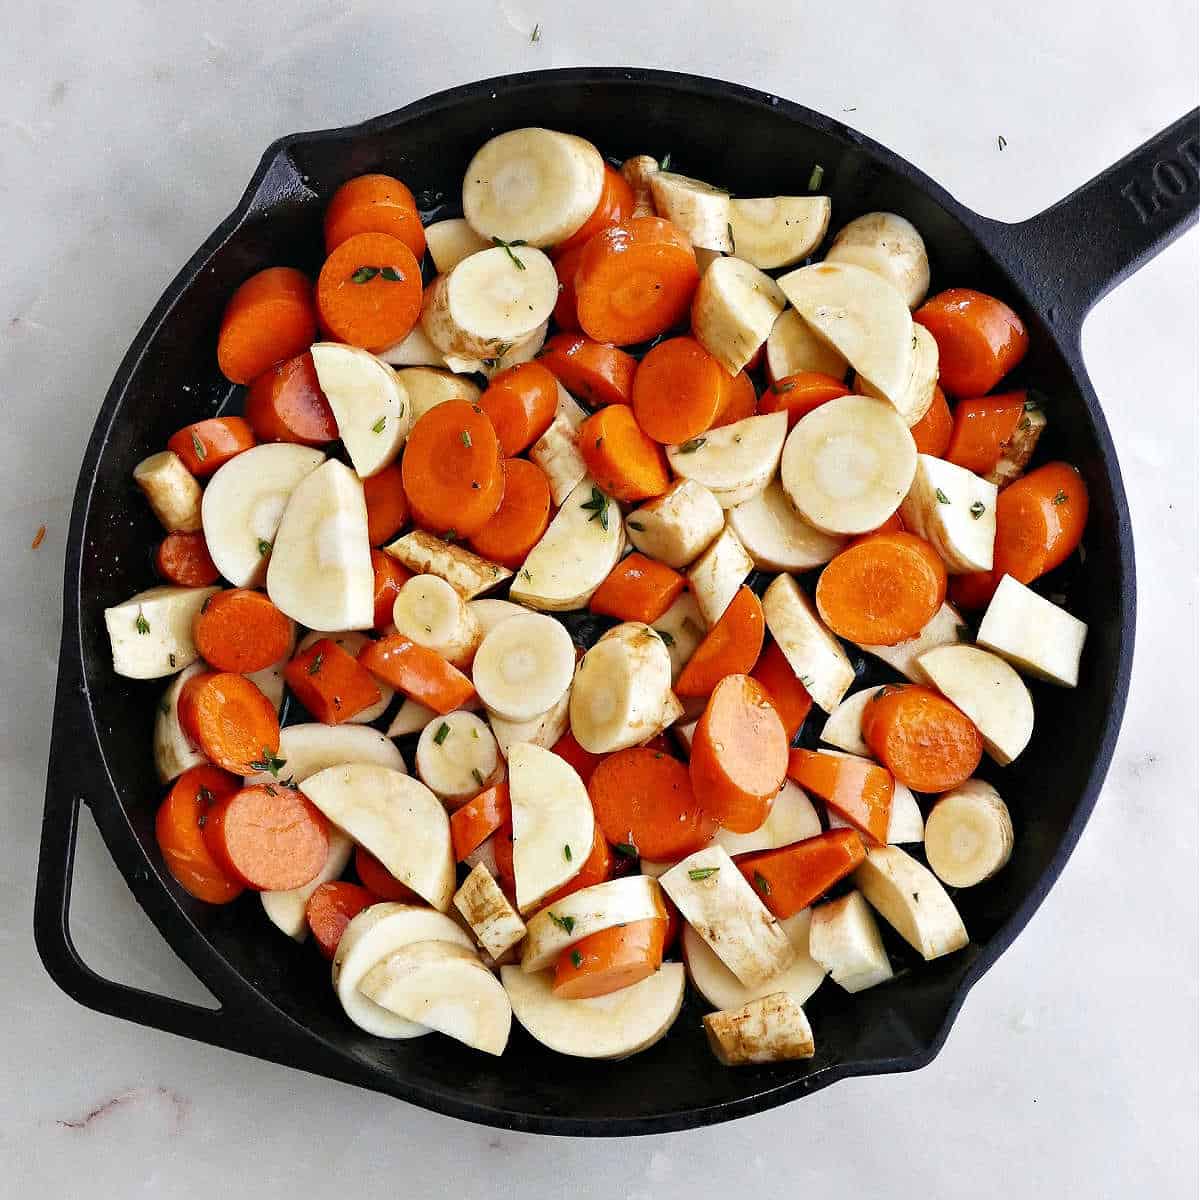 sliced carrots and parsnips in a cast iron pan before going into the oven to roast